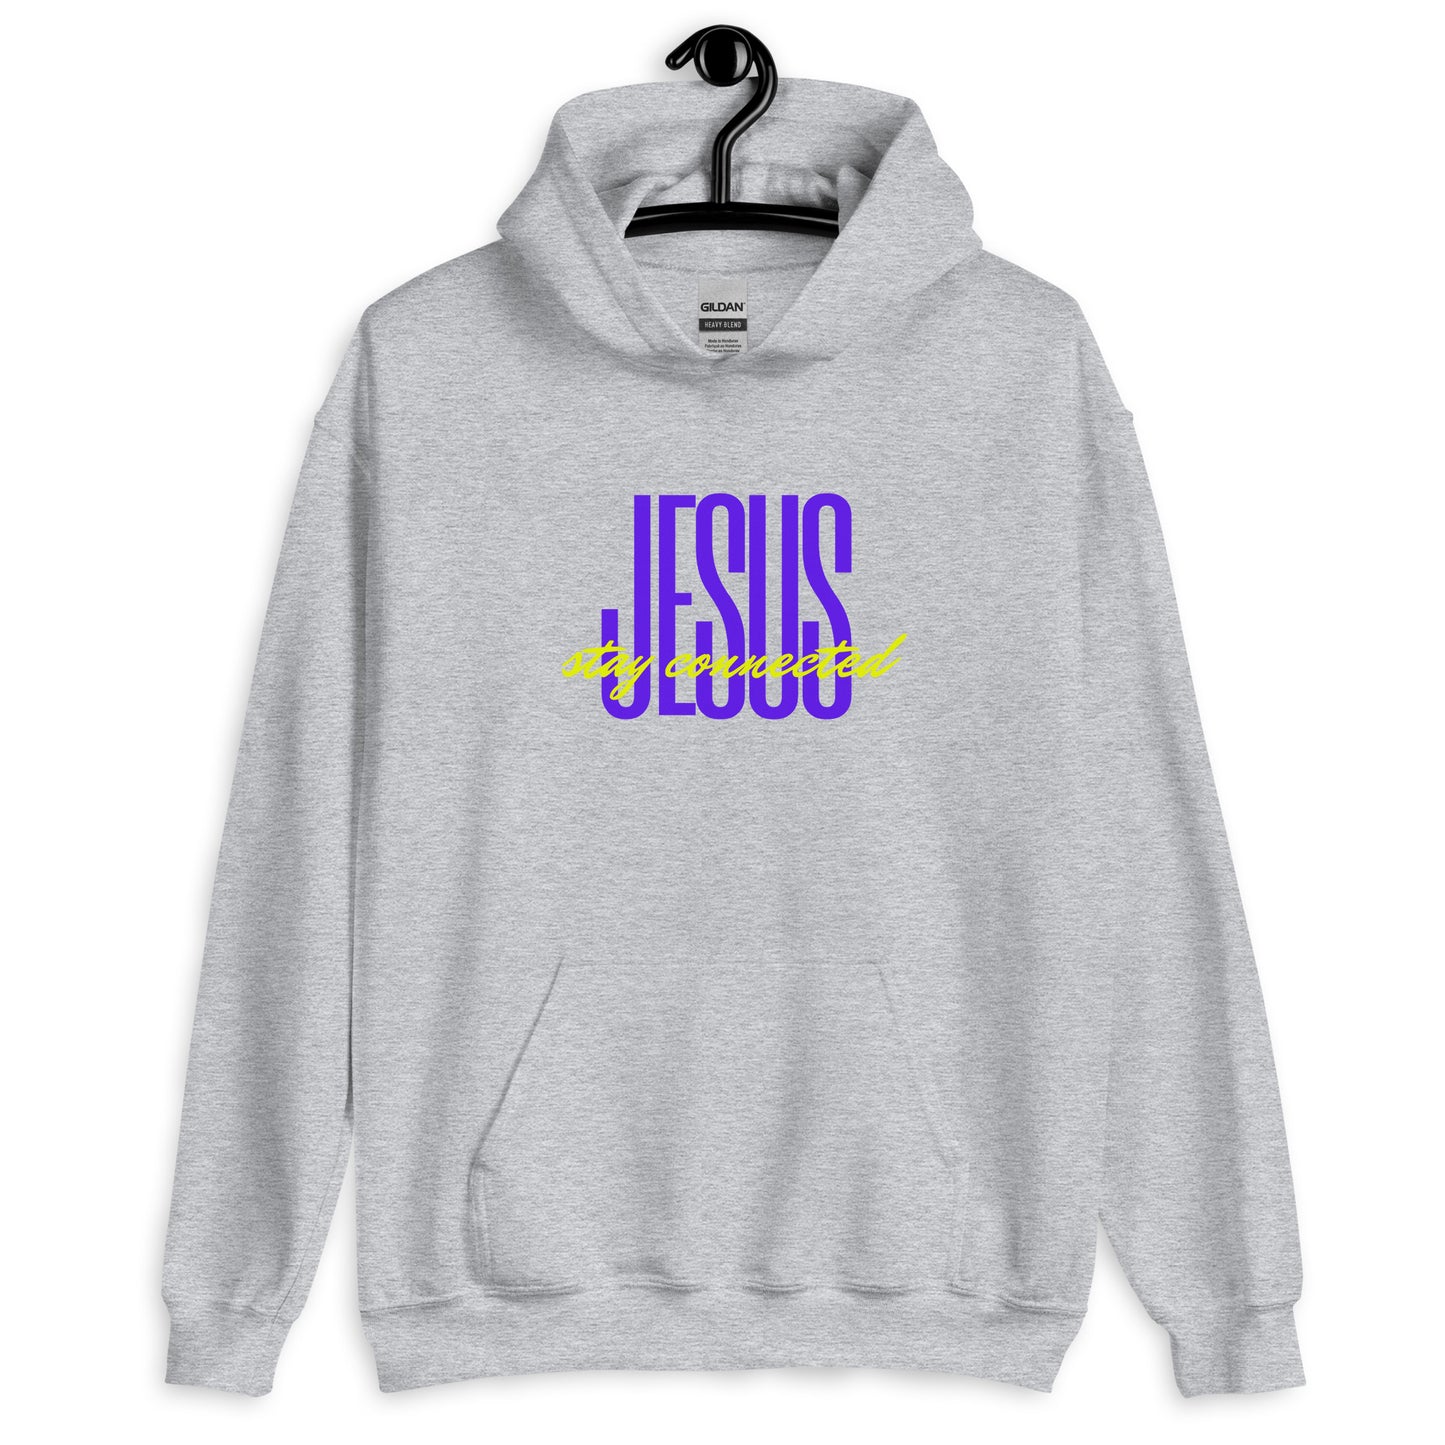 "Stay Connected" Unisex Hoodie (Purple/Yellow) (2 Color Options)